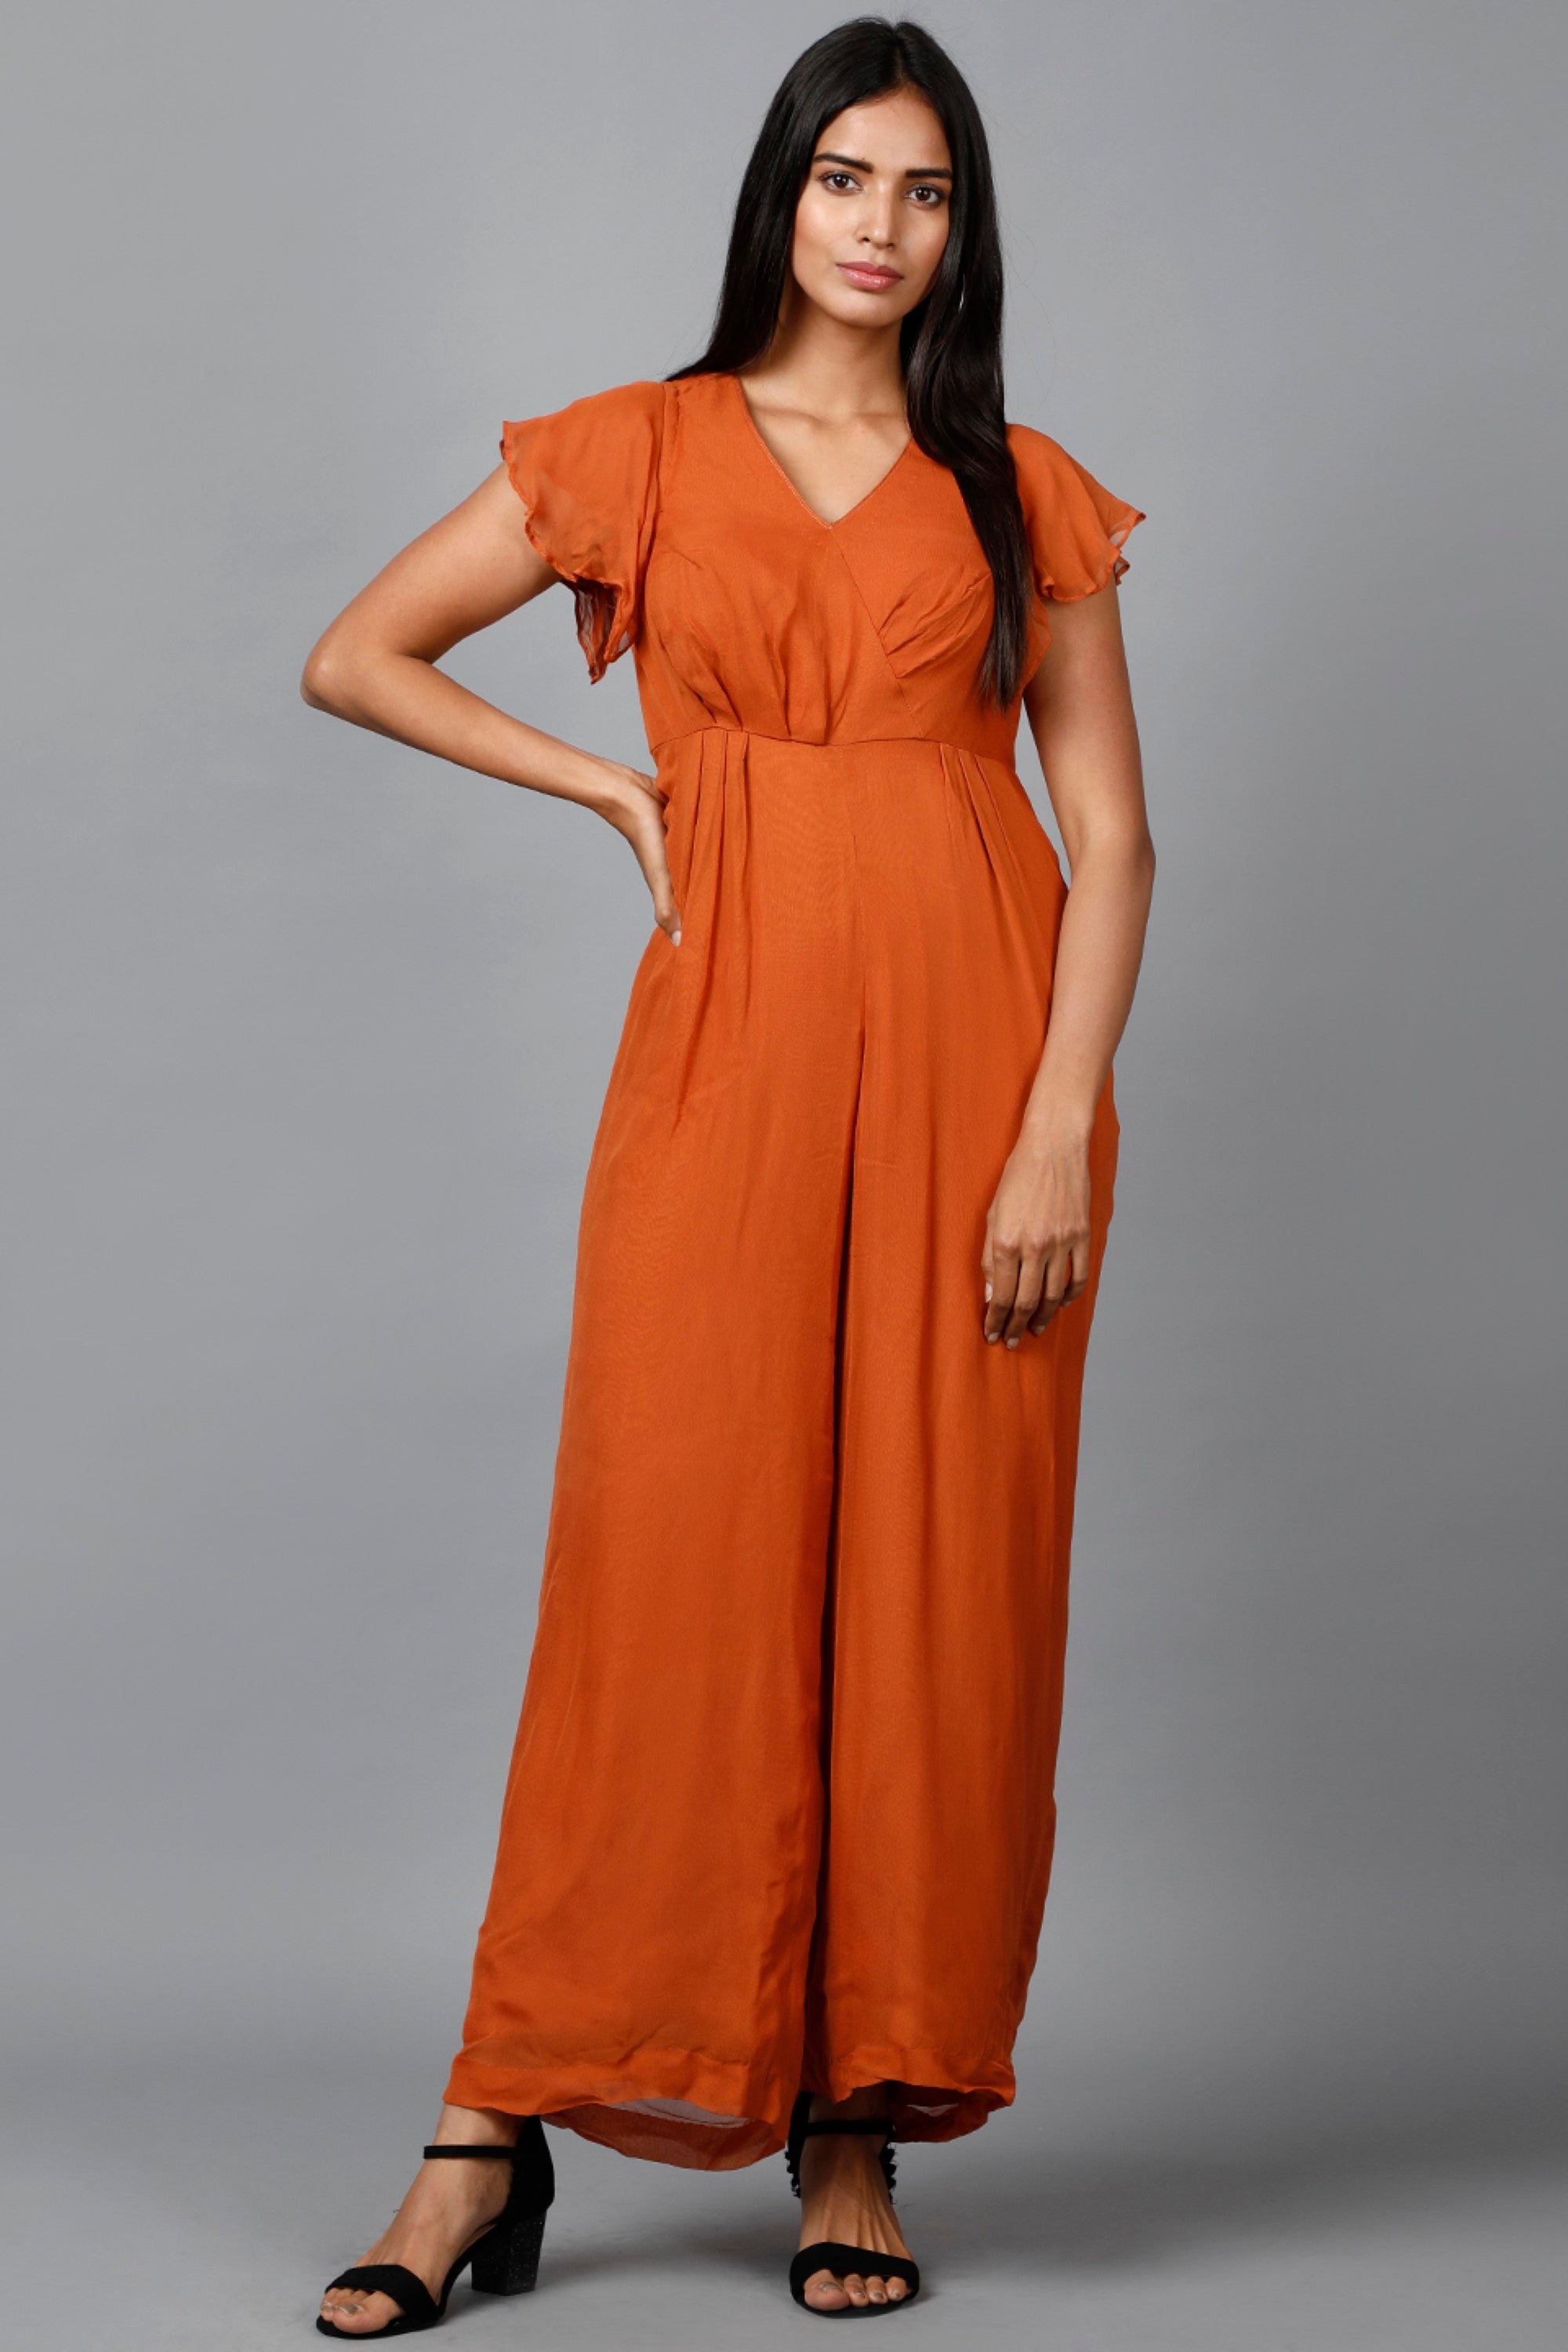 Women's Drape Party/ Casual Jumpsuit In Brown - MIRACOLOS by Ruchi